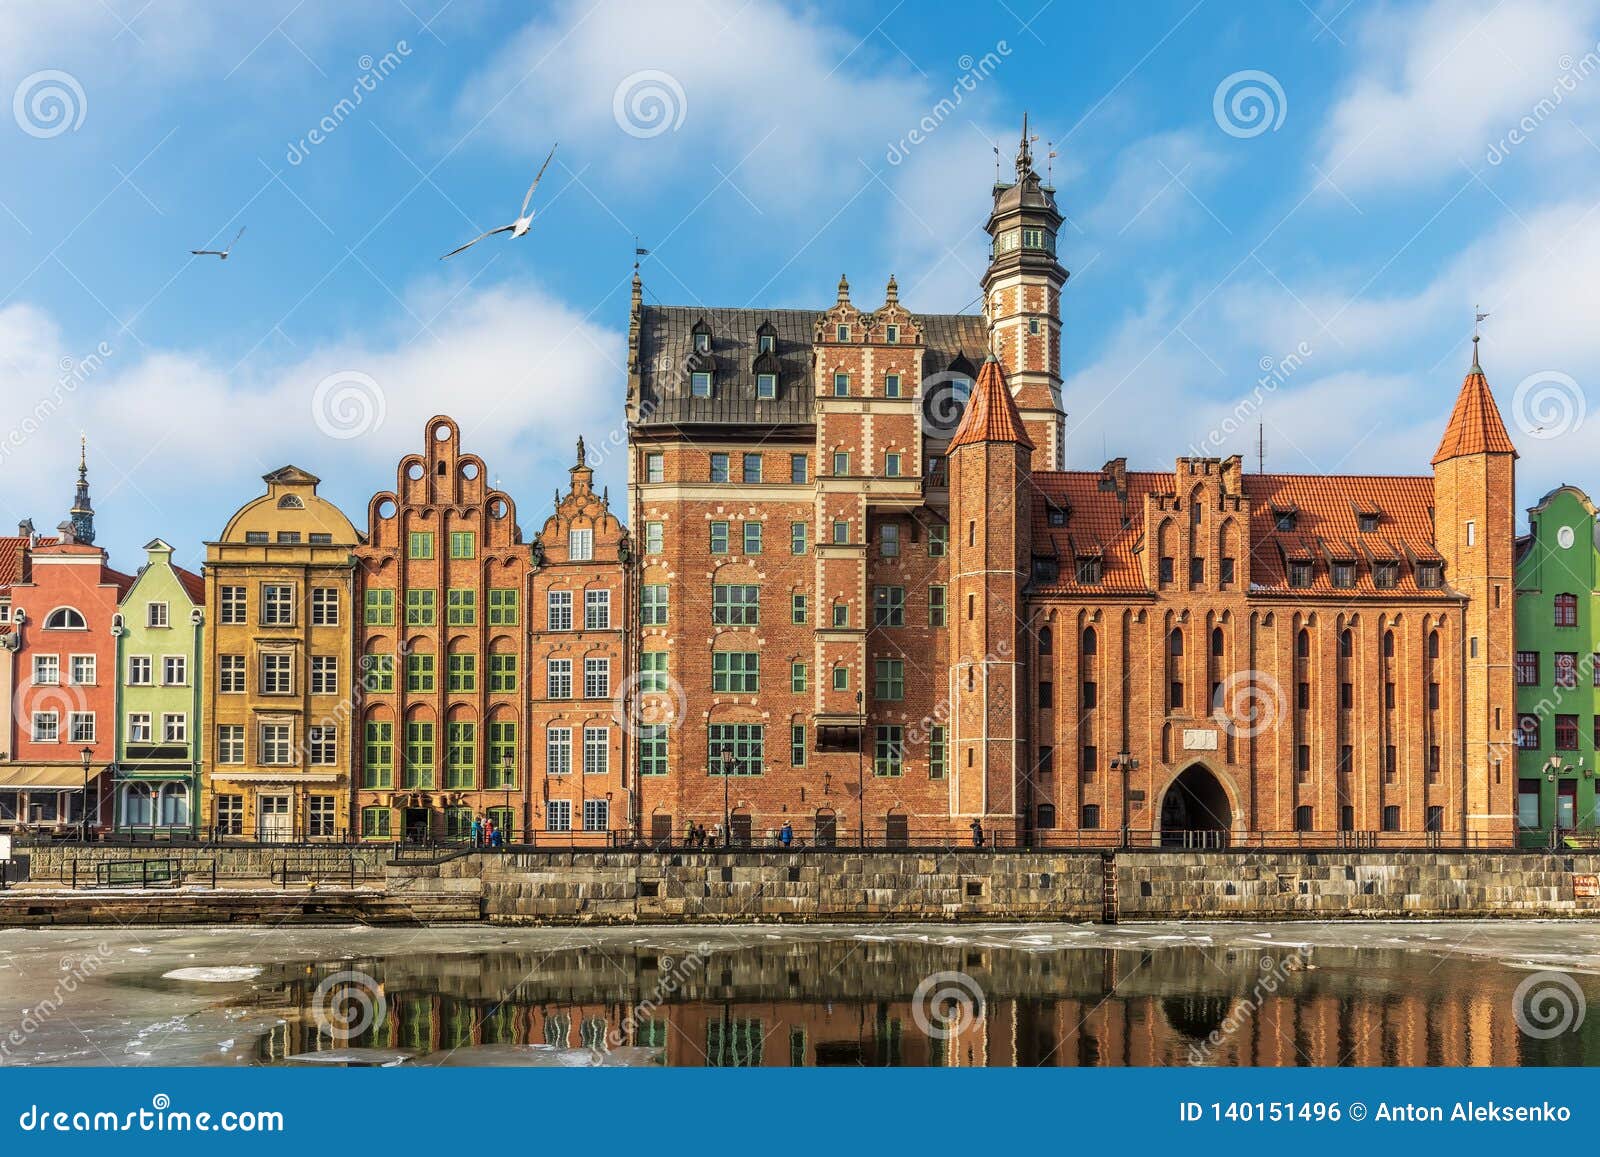 mariacka gate and other colorful facades in gdansk, poland